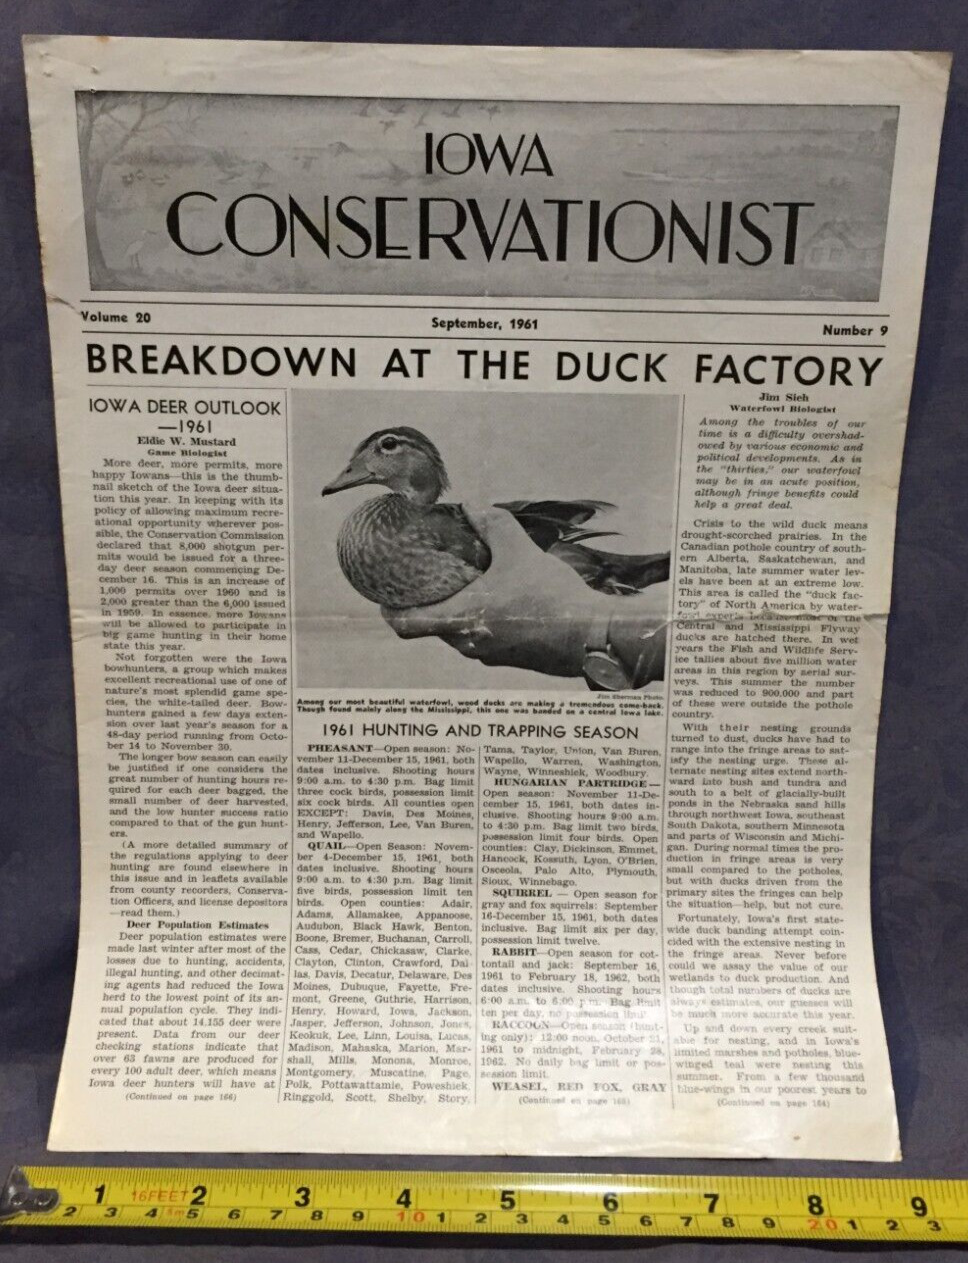 Iowa Conservationist September 1961 Breakdown at the duck factory